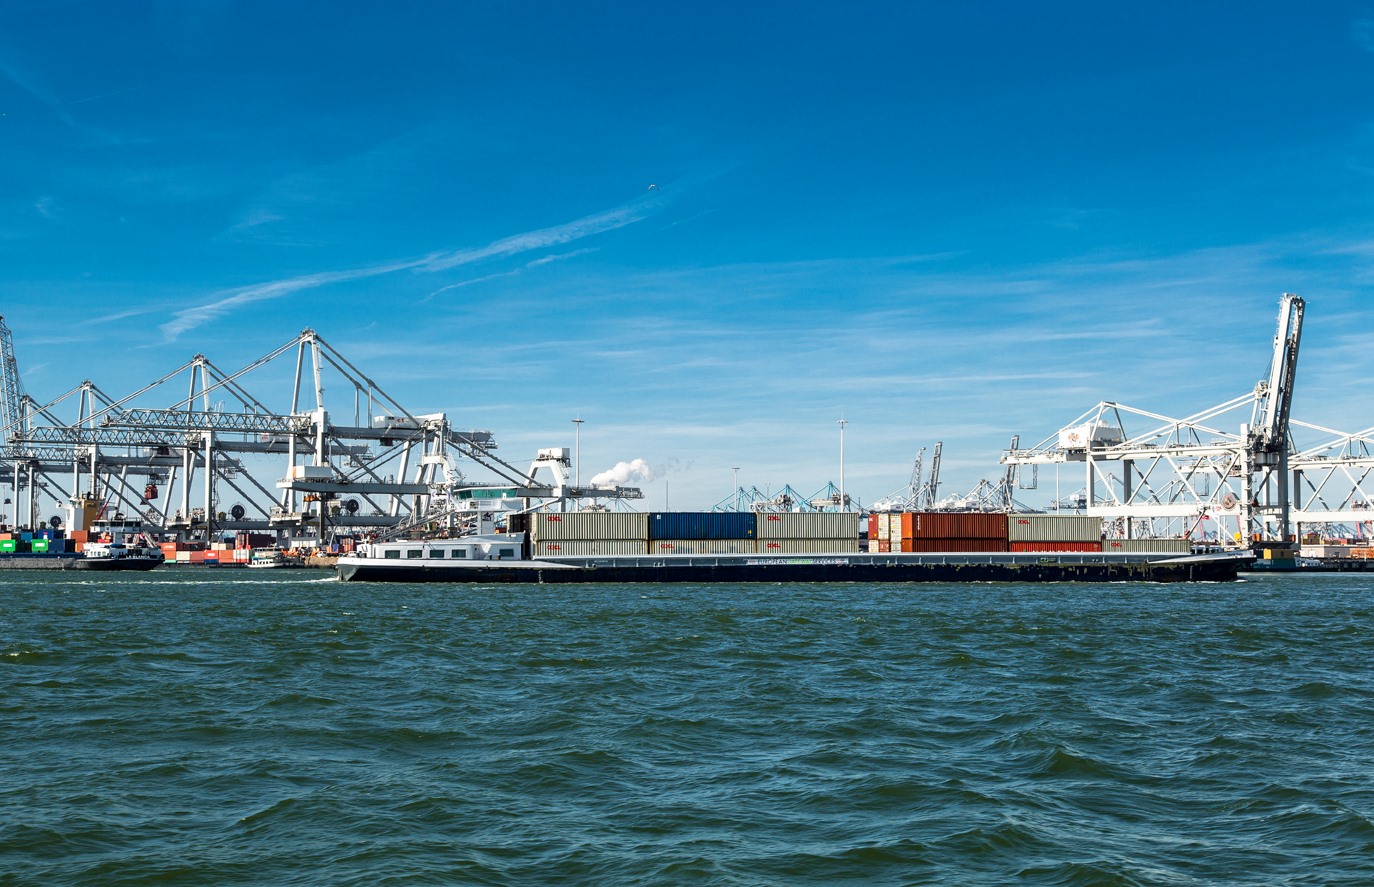 Barge Transferium Maasvlakte Launched in the Port of Rotterdam